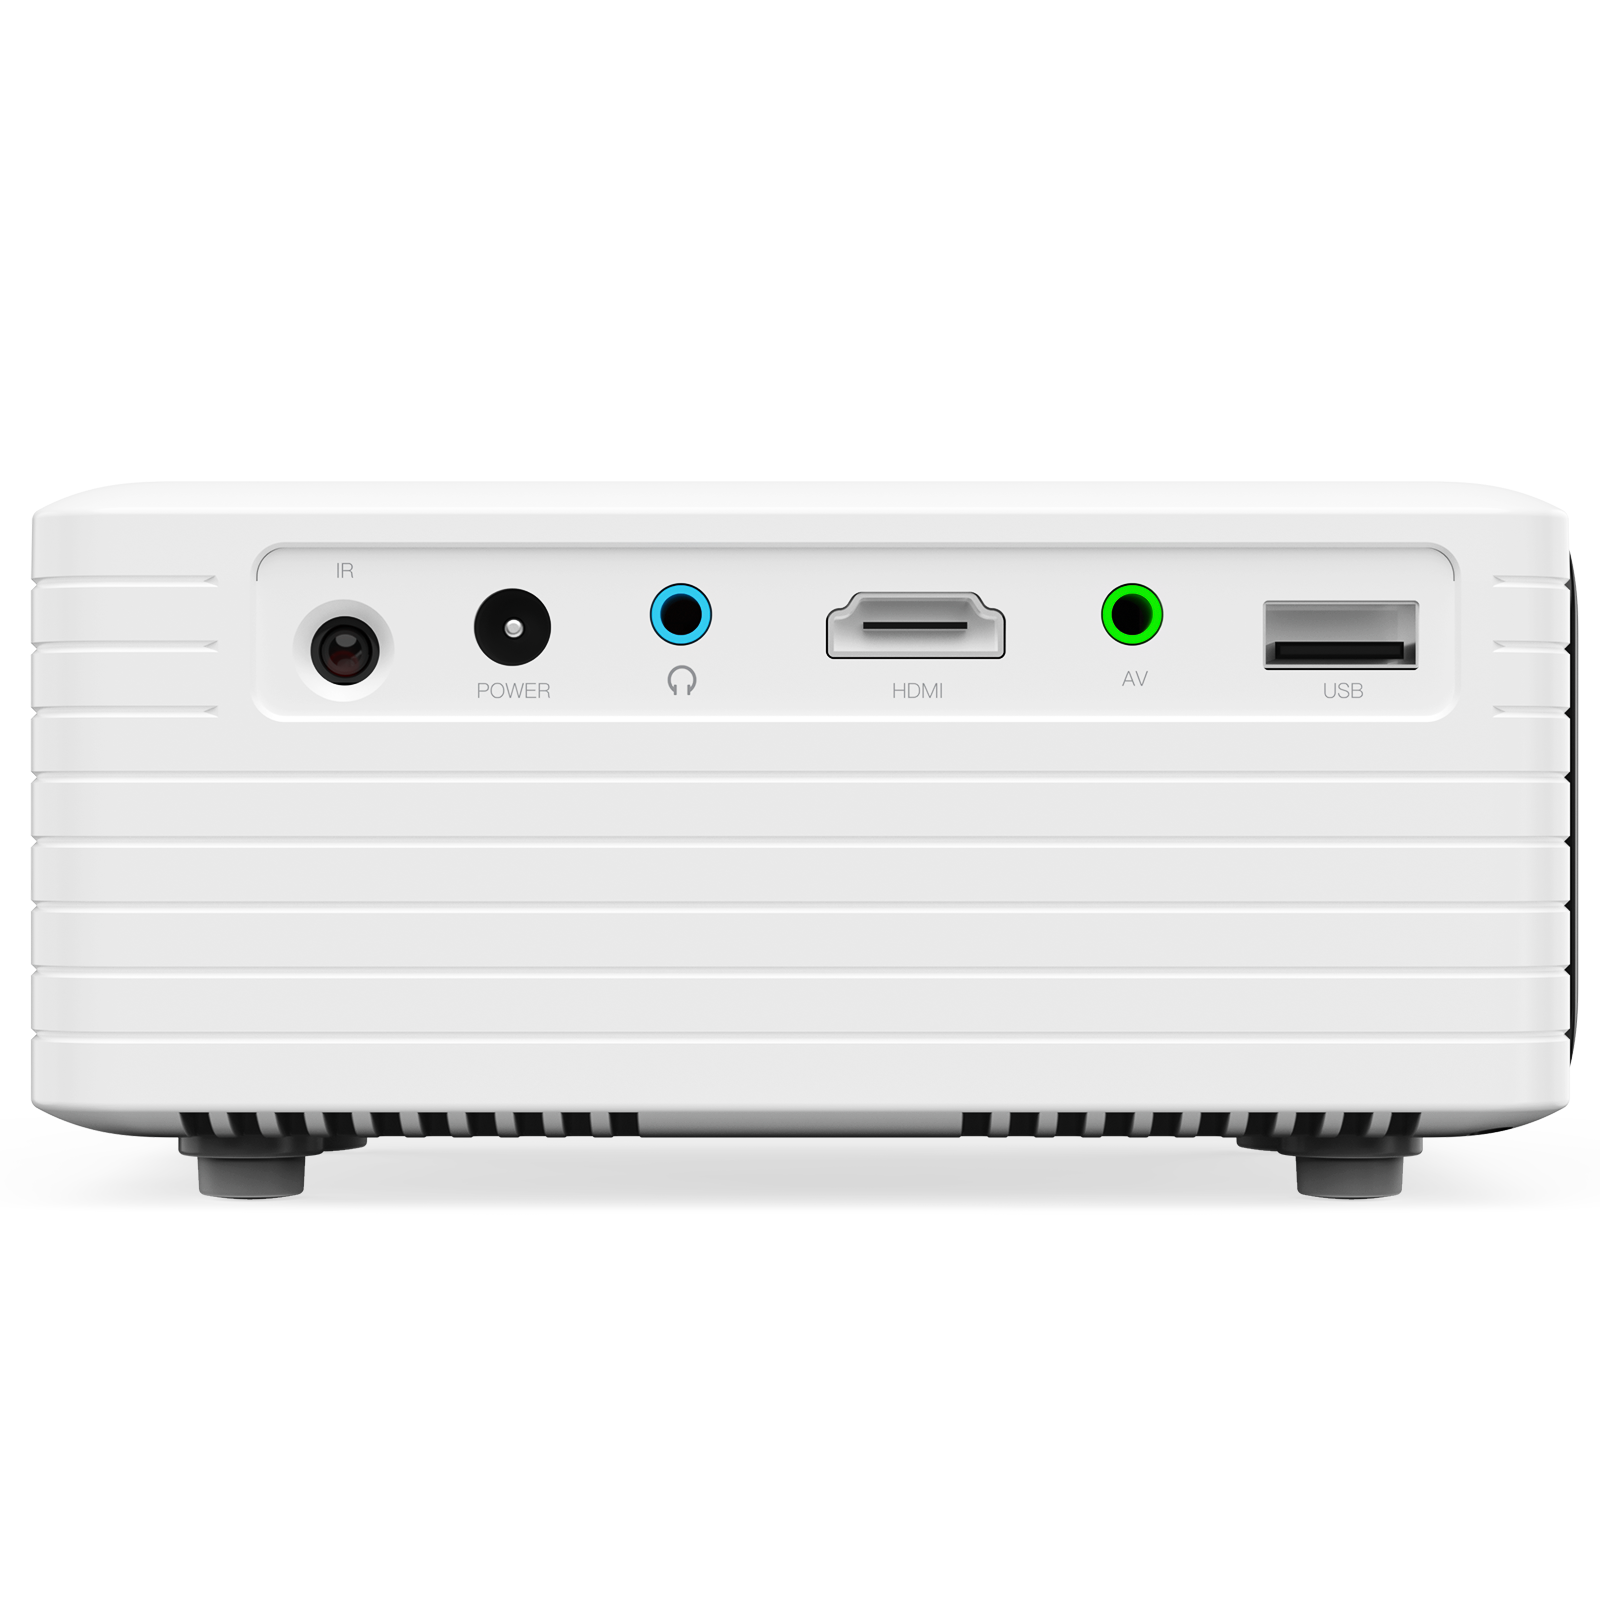 apeman LC500 Lower Noise Cost-effective Projector